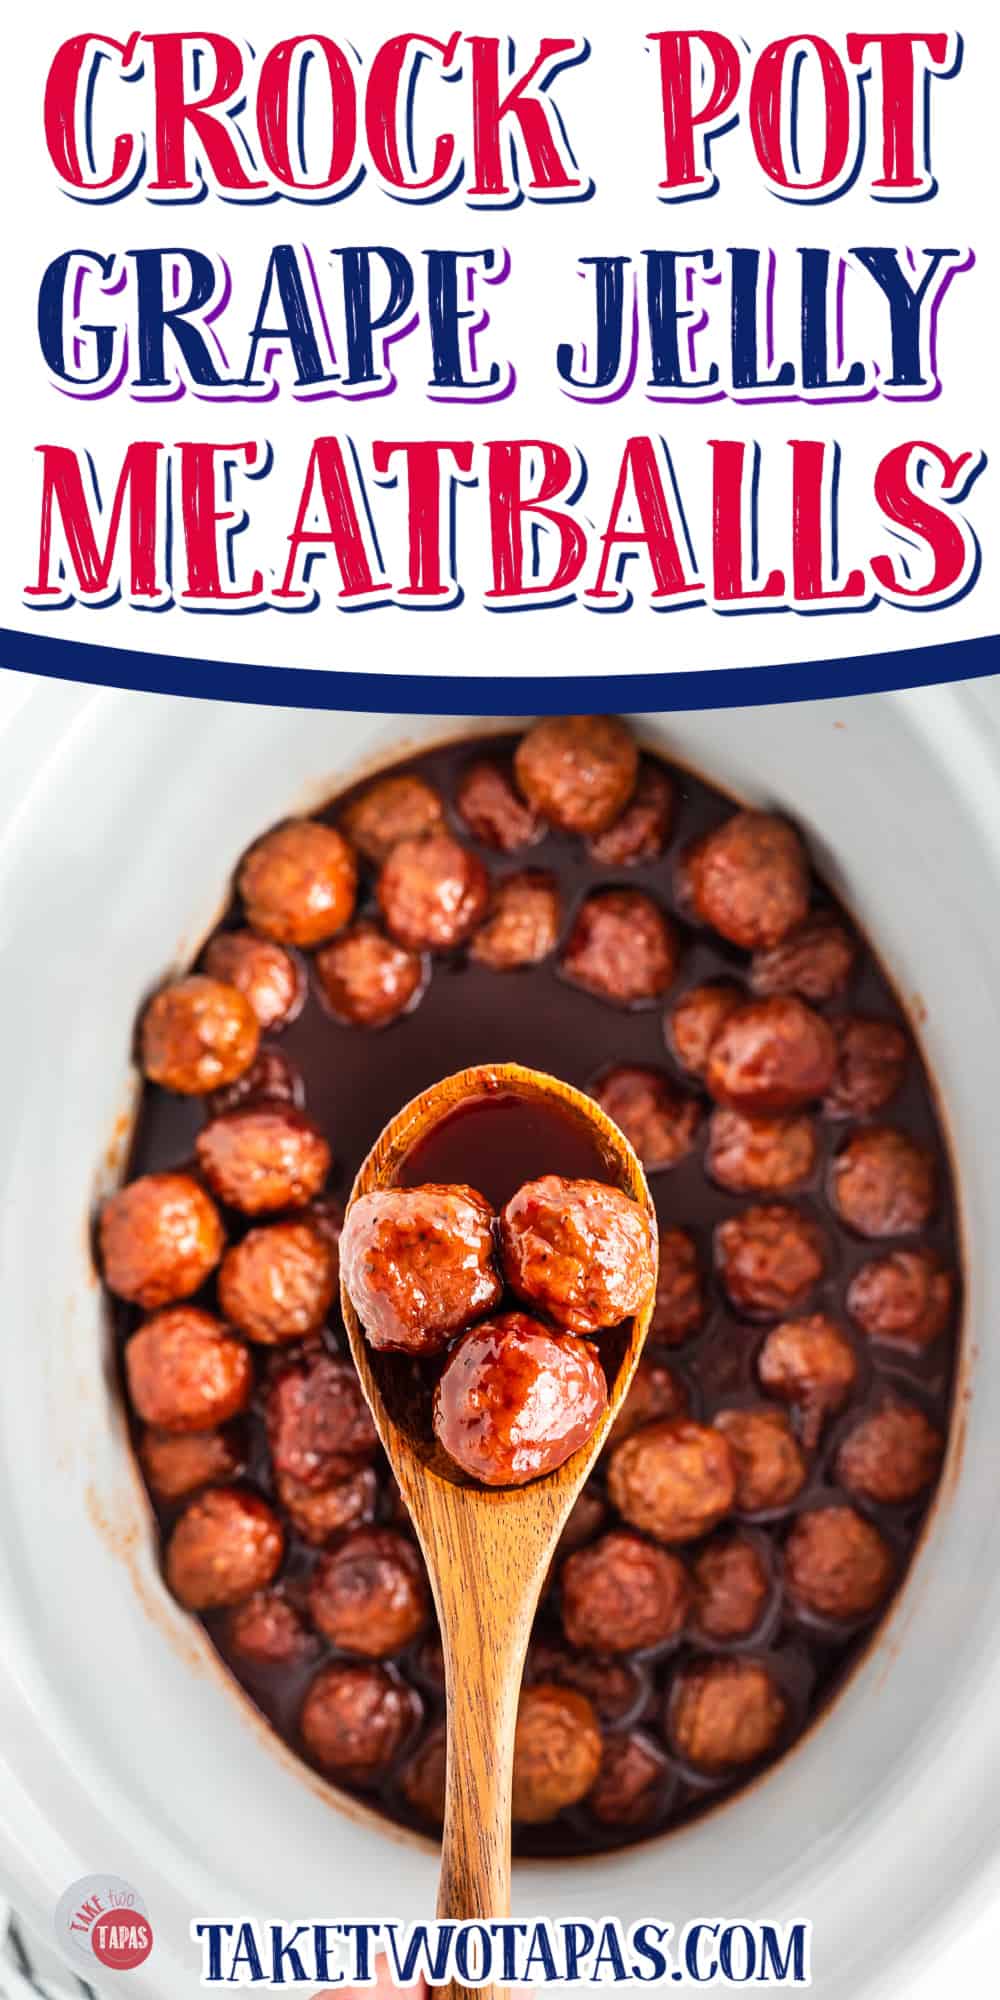 crockpot of meatballs with text "grape jelly meatballs"